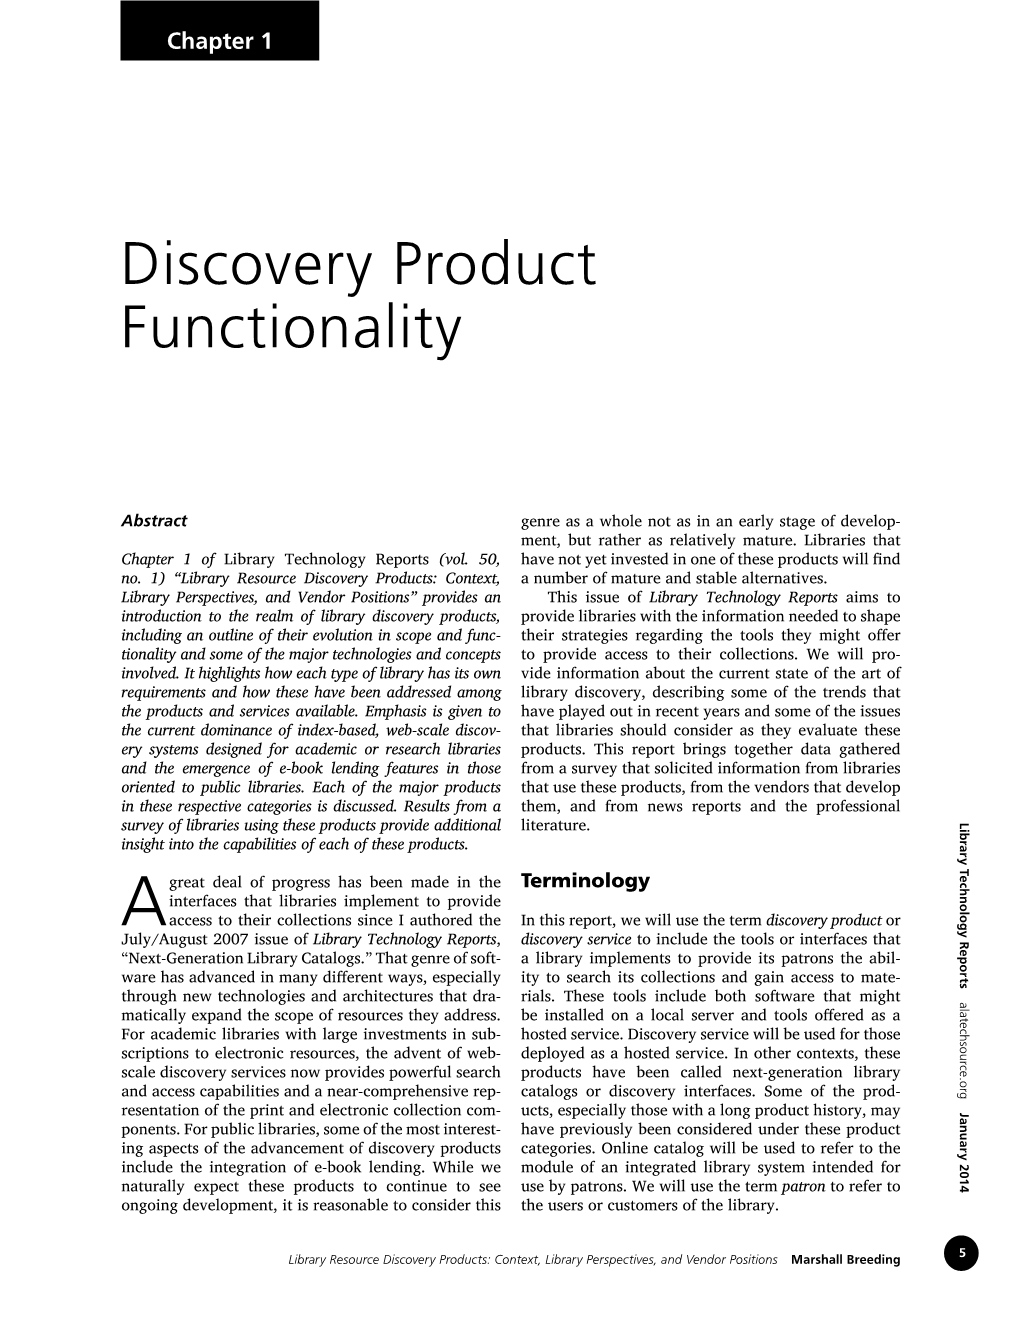 Discovery Product Functionality